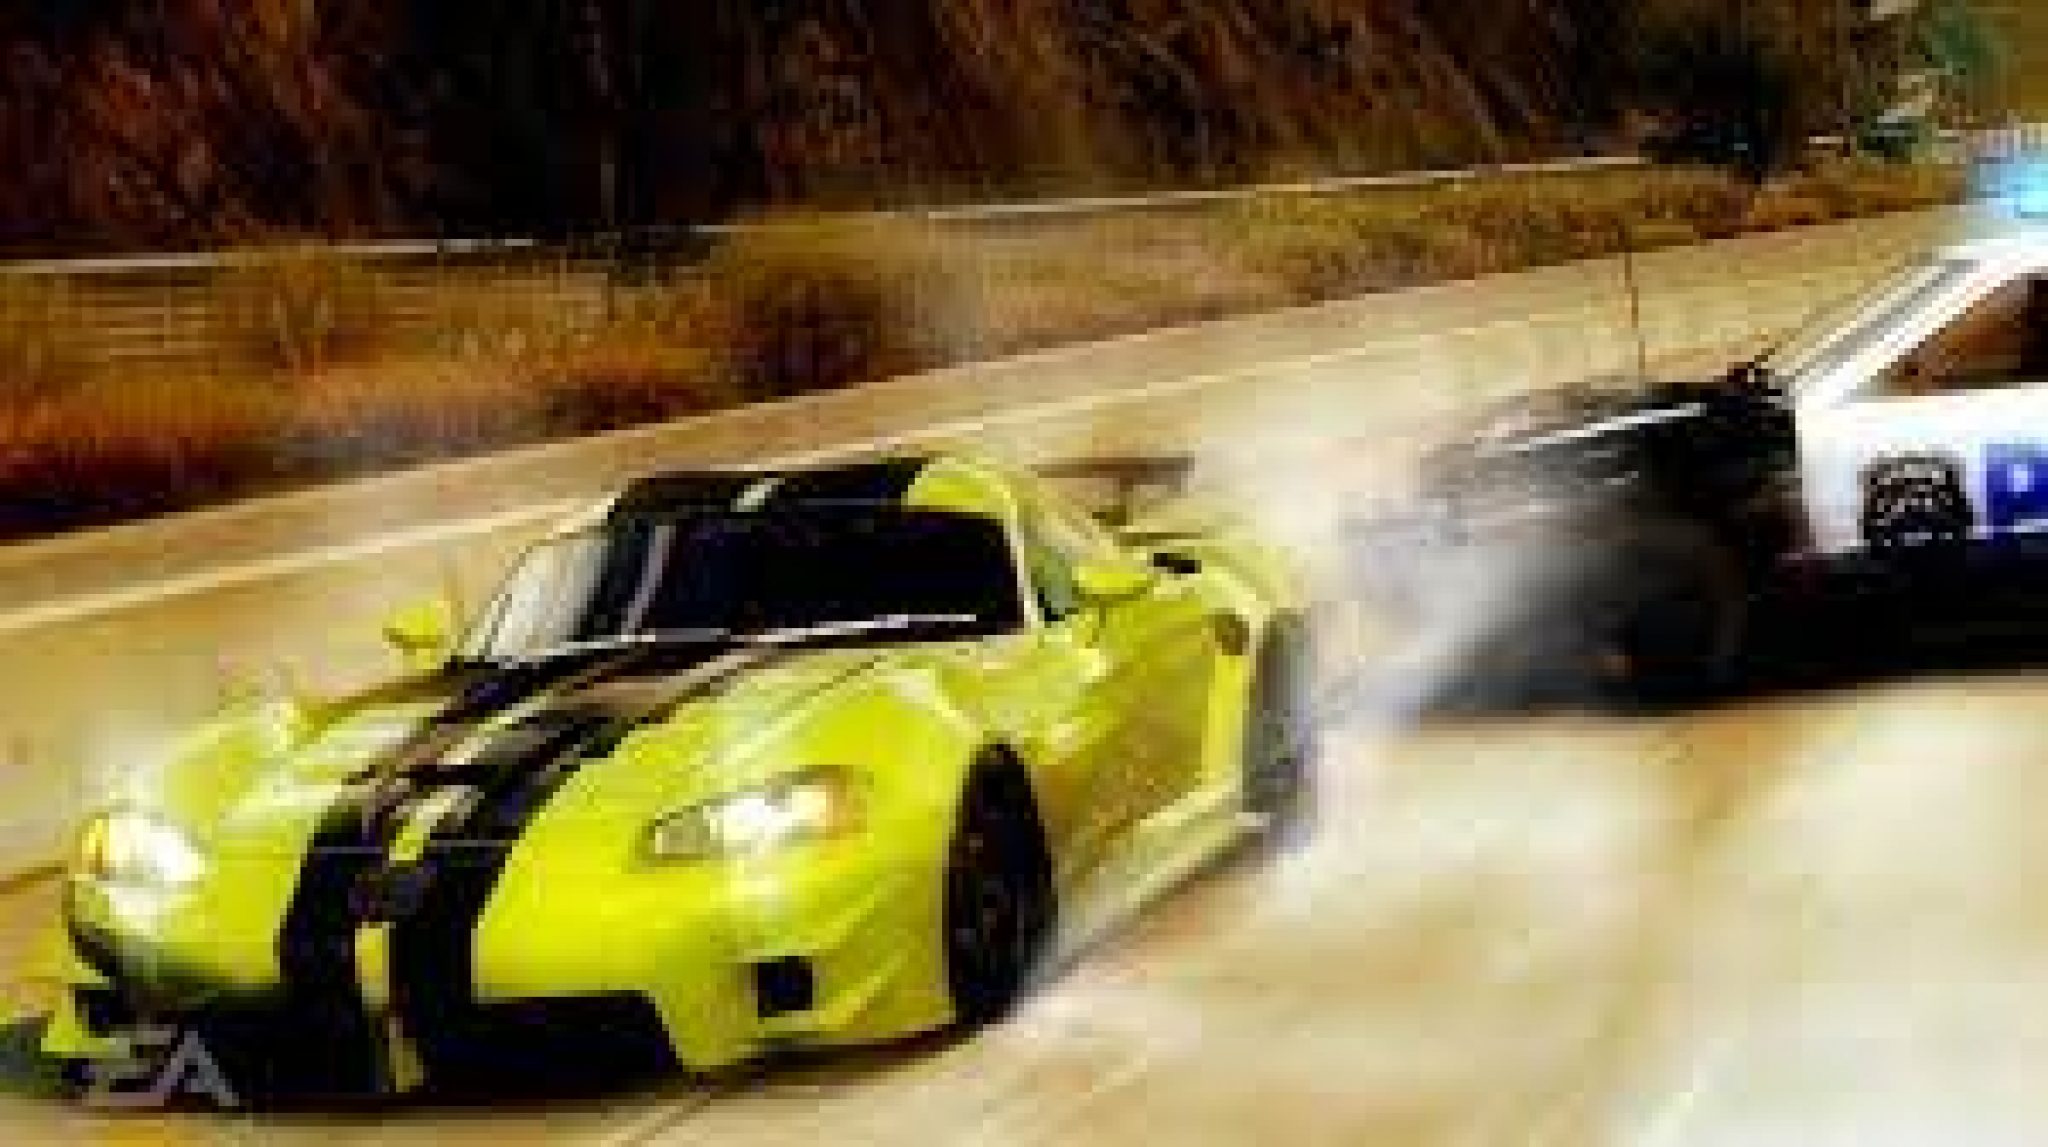 nfs undercover pc download windows 10